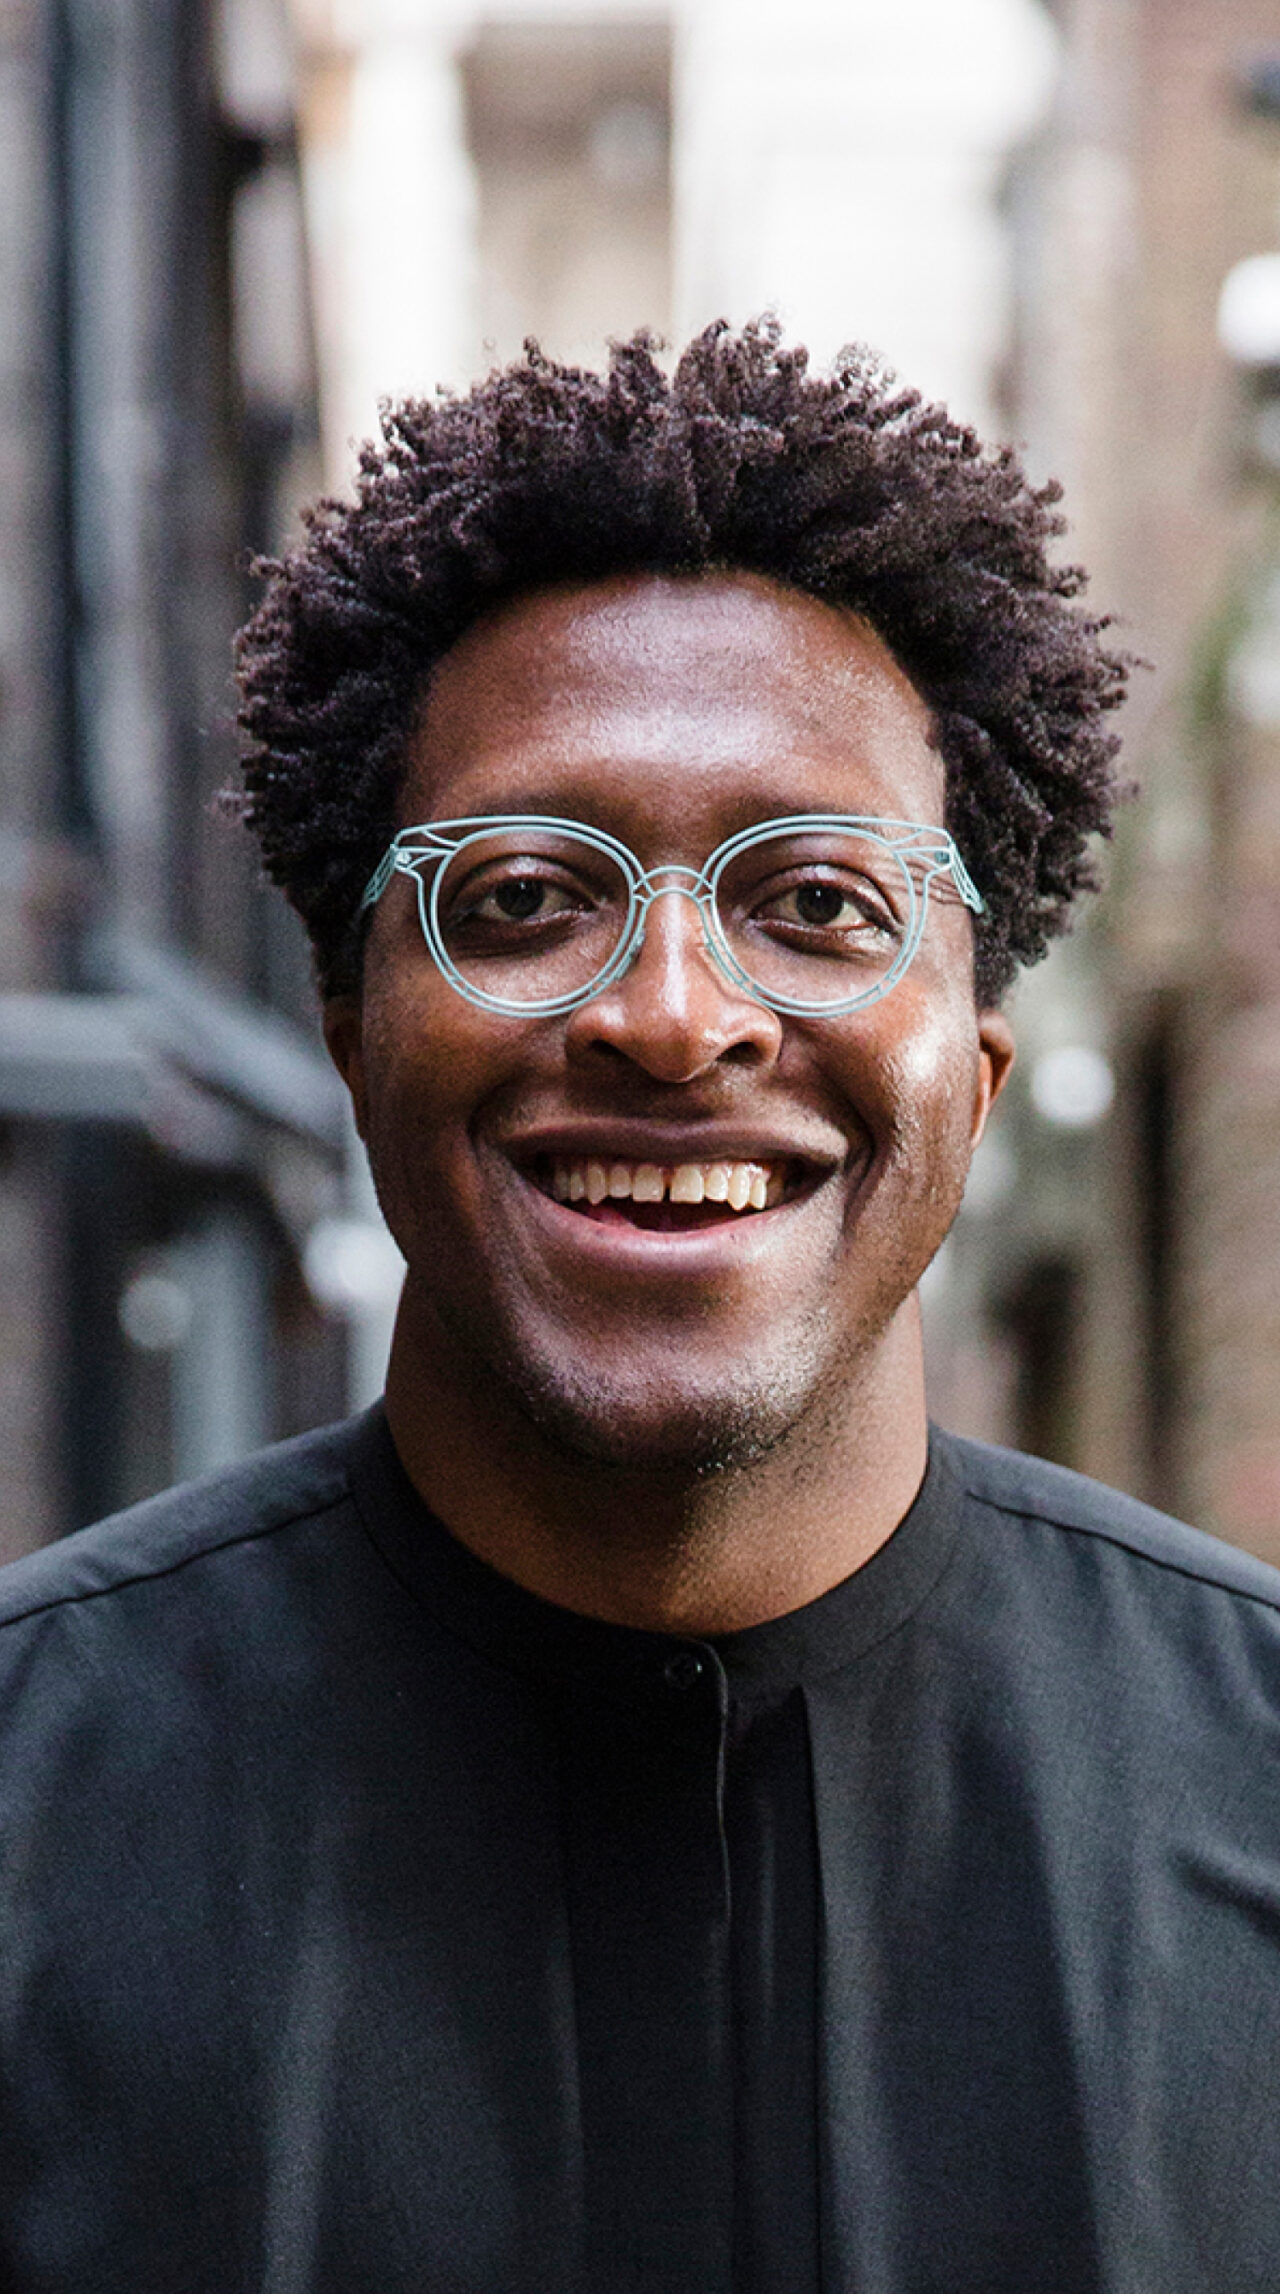 A young African man with an open mouth smile showing teeth, he's wearing a black collar-less shirt and blue glasses which contrast against his dark brown skin. He is standing in an outdoor urban space.